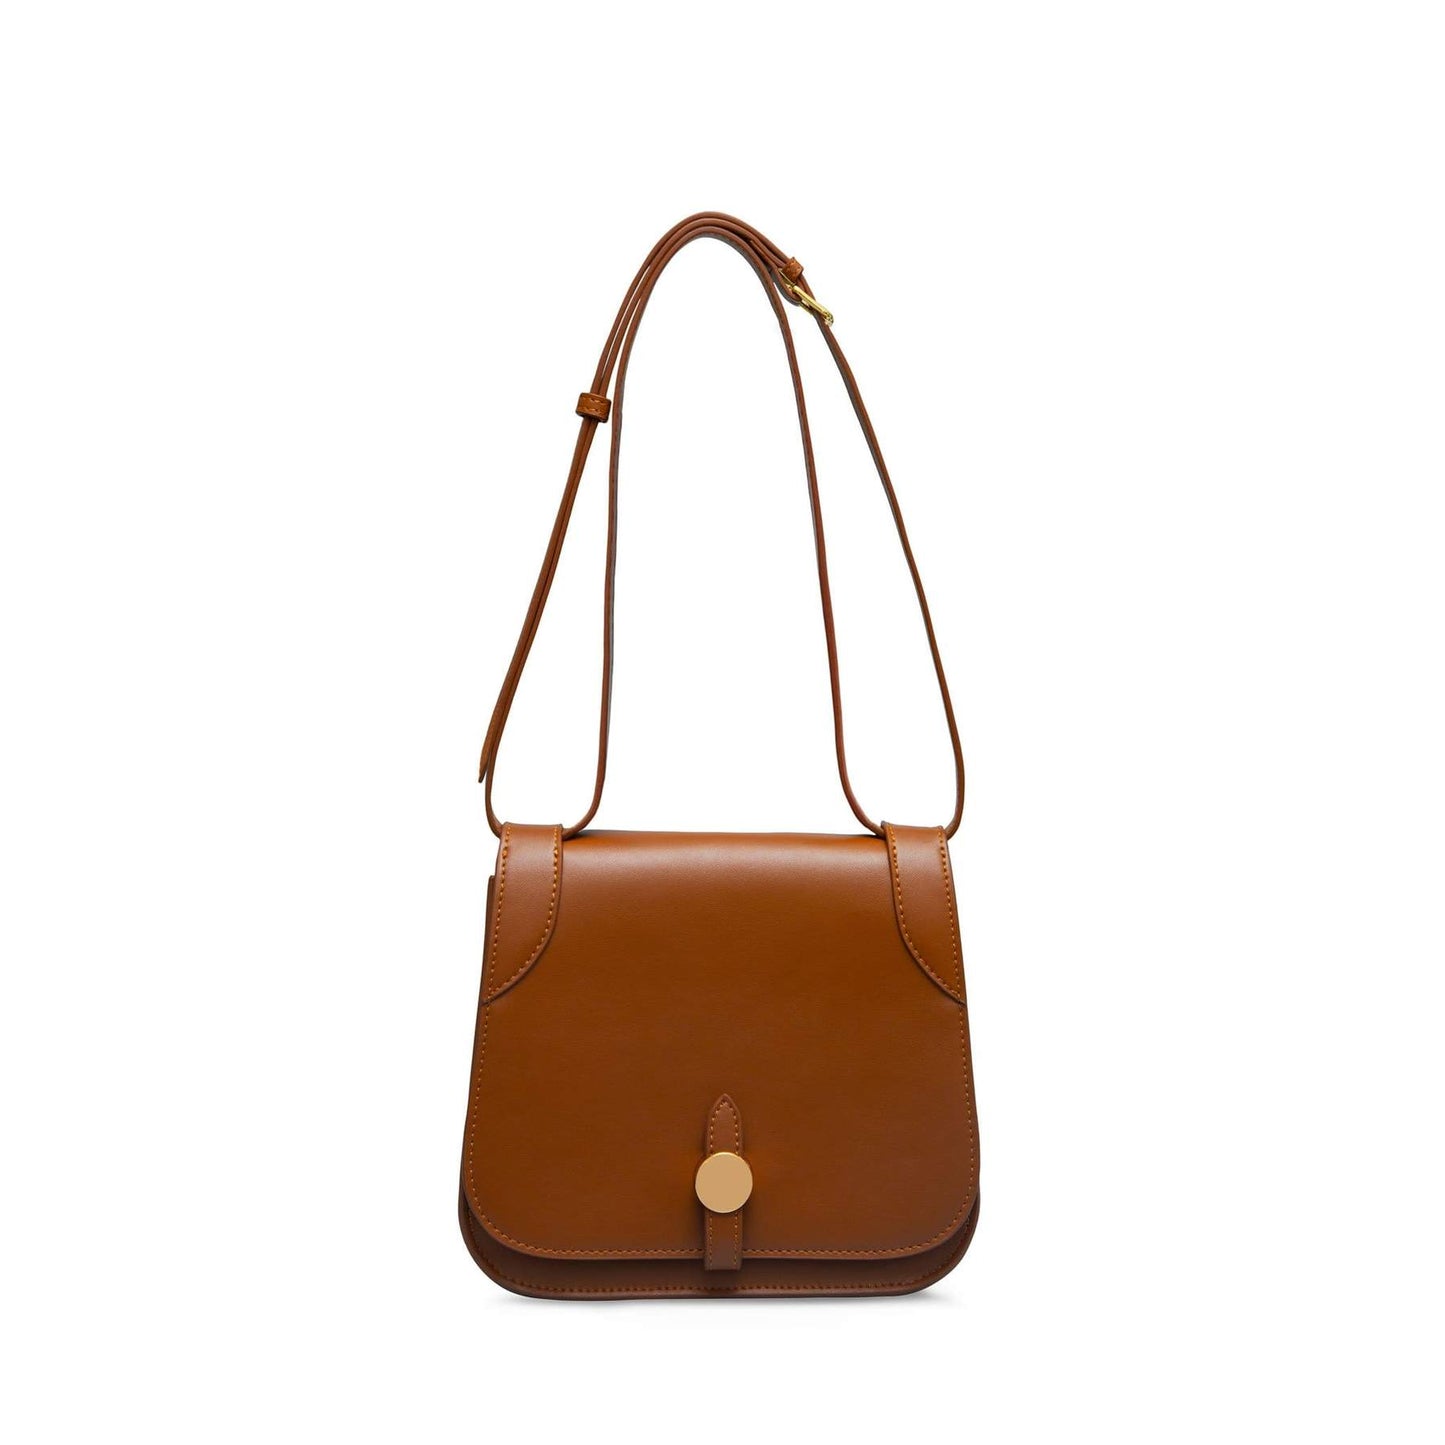 X NIHILO - SOLESTE LEATHER SHOULDER BAG -TAN Front view with folded strap